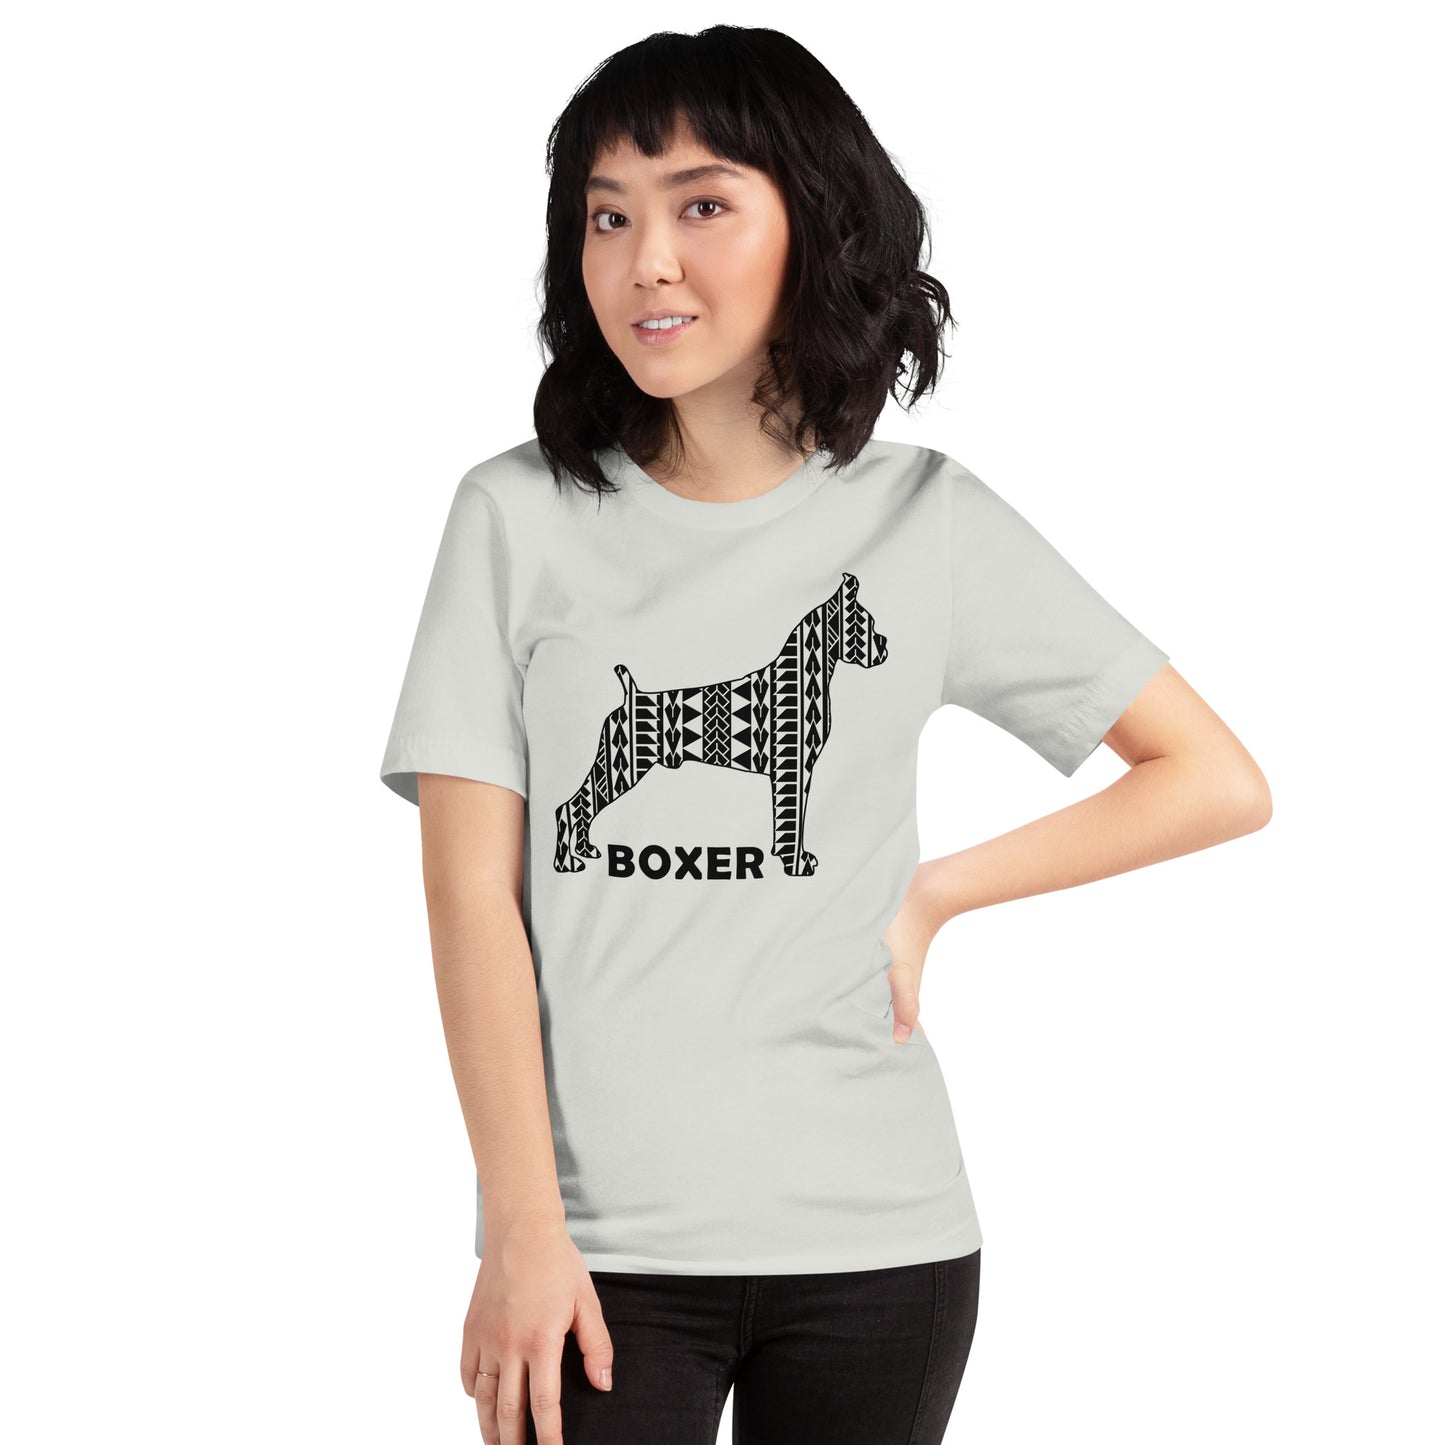 Boxer Polynesian t-shirt silver by Dog Artistry.